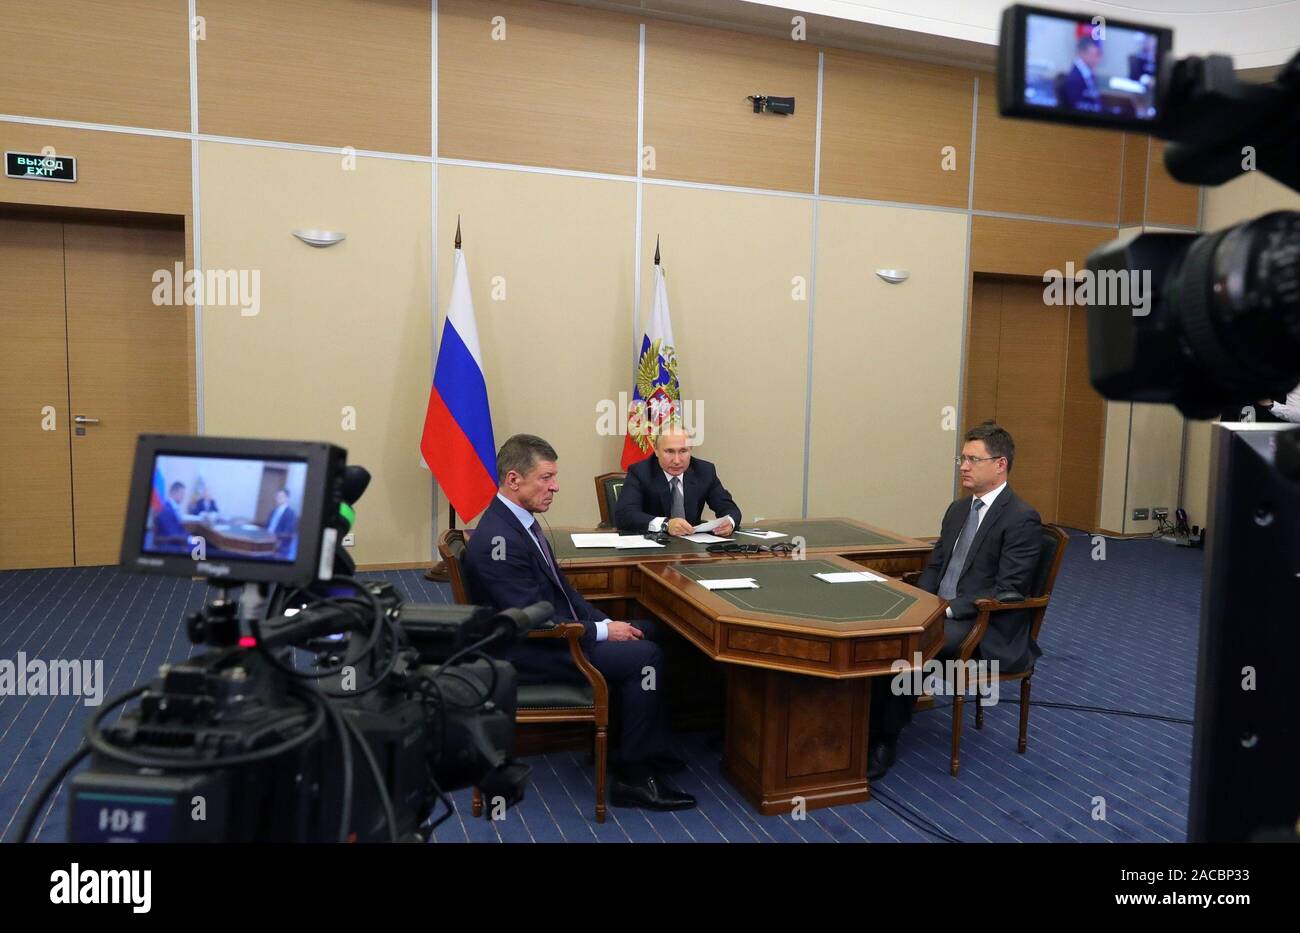 Moscow, Russia. 02nd Dec, 2019. Russian President Vladimir Putin (C), Russian Energy Minister Alexander Novak (R) and Deputy Prime Minister Dmitry Kozak watch the launching ceremony of the China-Russia east-route natural gas pipeline via teleconference in Sochi, Russia, Dec. 2, 2019. Chinese President Xi Jinping had a video call with his Russian counterpart Vladimir Putin Monday afternoon, as the two heads of state jointly witnessed the launching ceremony of the China-Russia east-route natural gas pipeline. (Sputnik/Handout via Xinhua) Credit: Xinhua/Alamy Live News Stock Photo